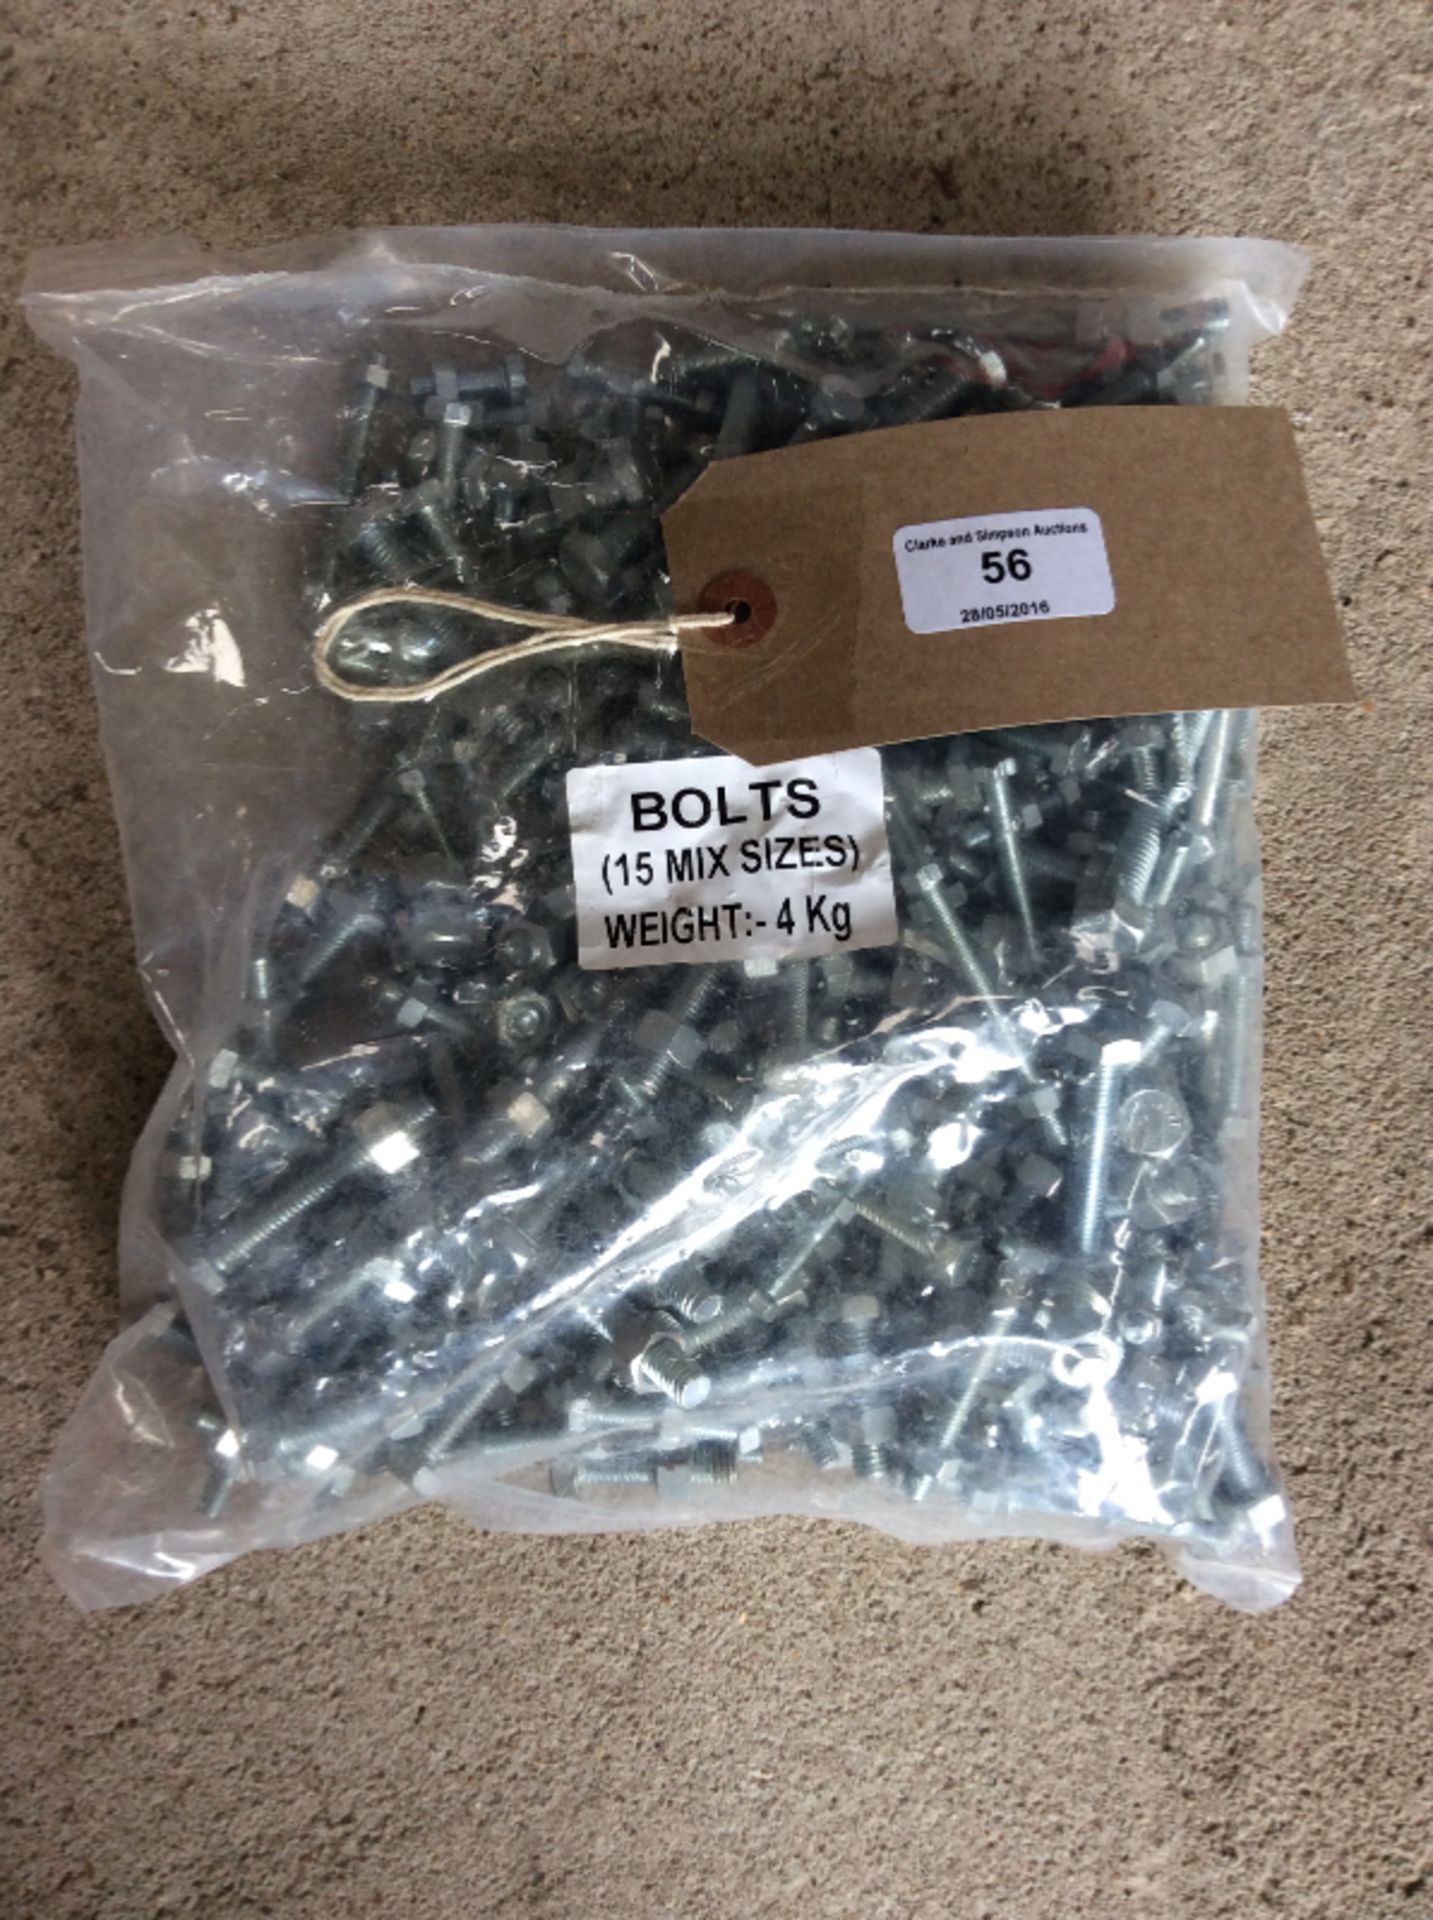 4KG mixed nuts and bolts